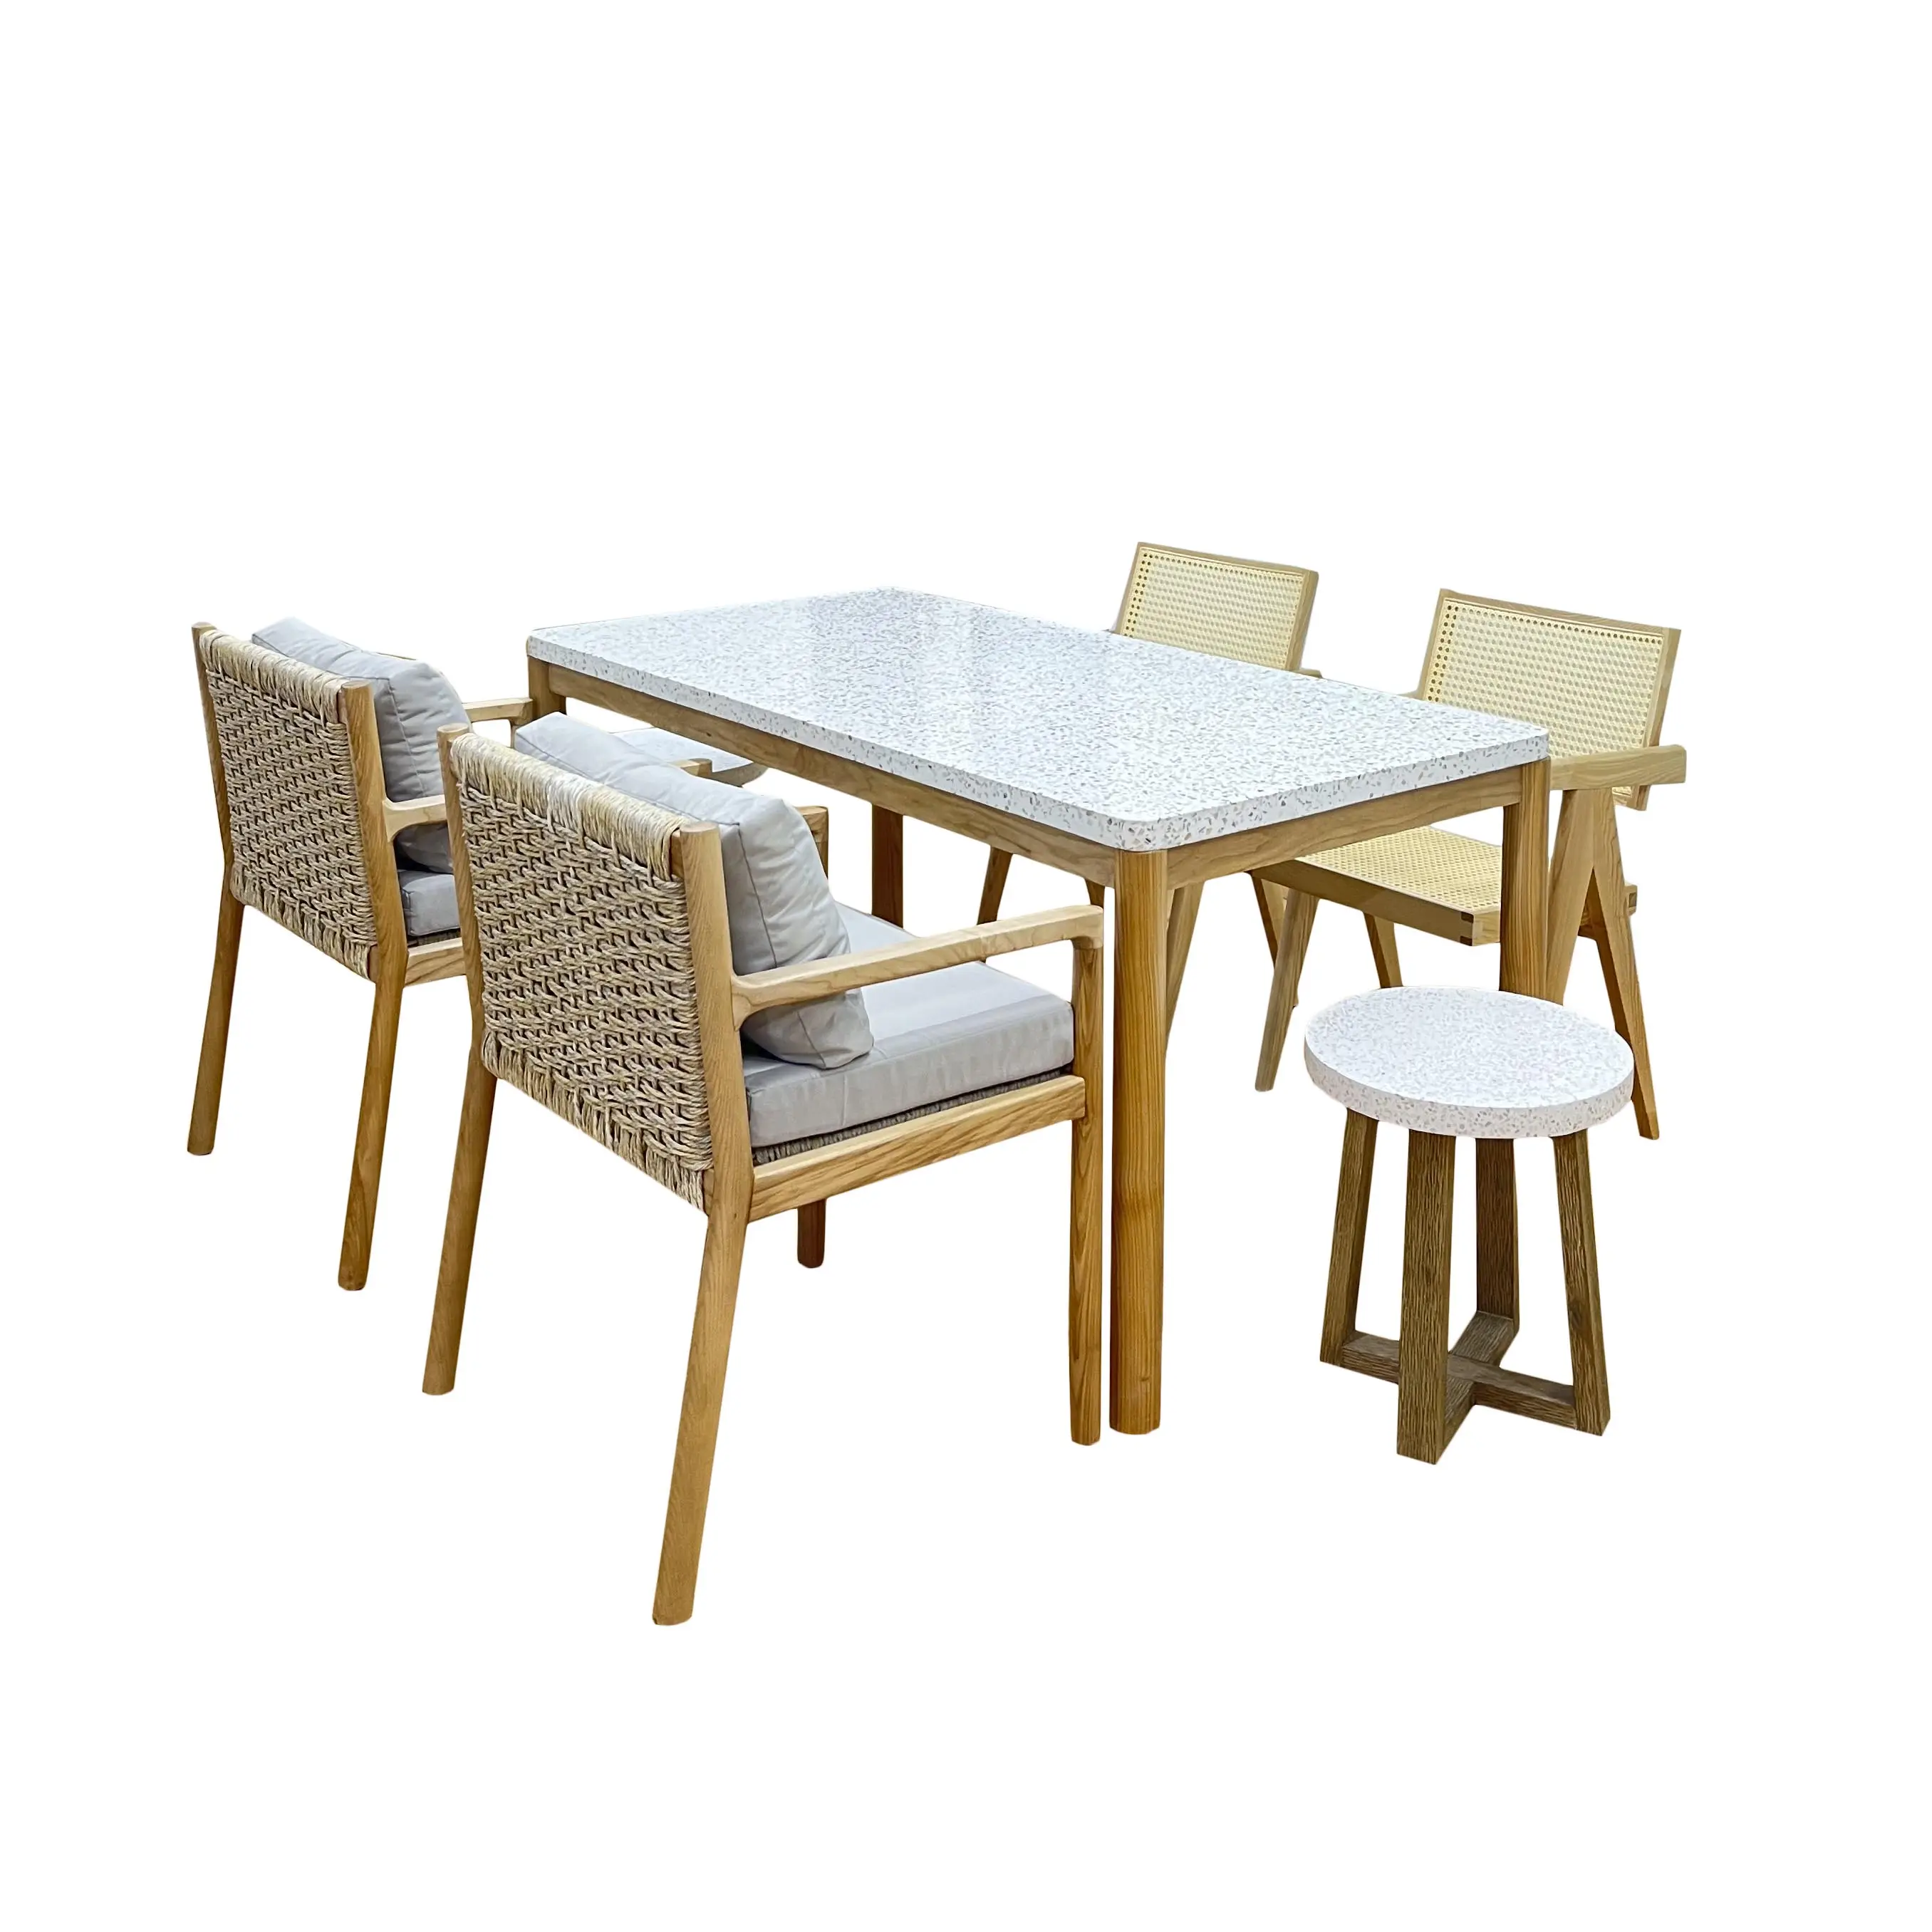 Wholesale Competitive Vietnamese Handmade Dinning Table And Chair Set Concrete Garden Furniture With Free Logo Printing